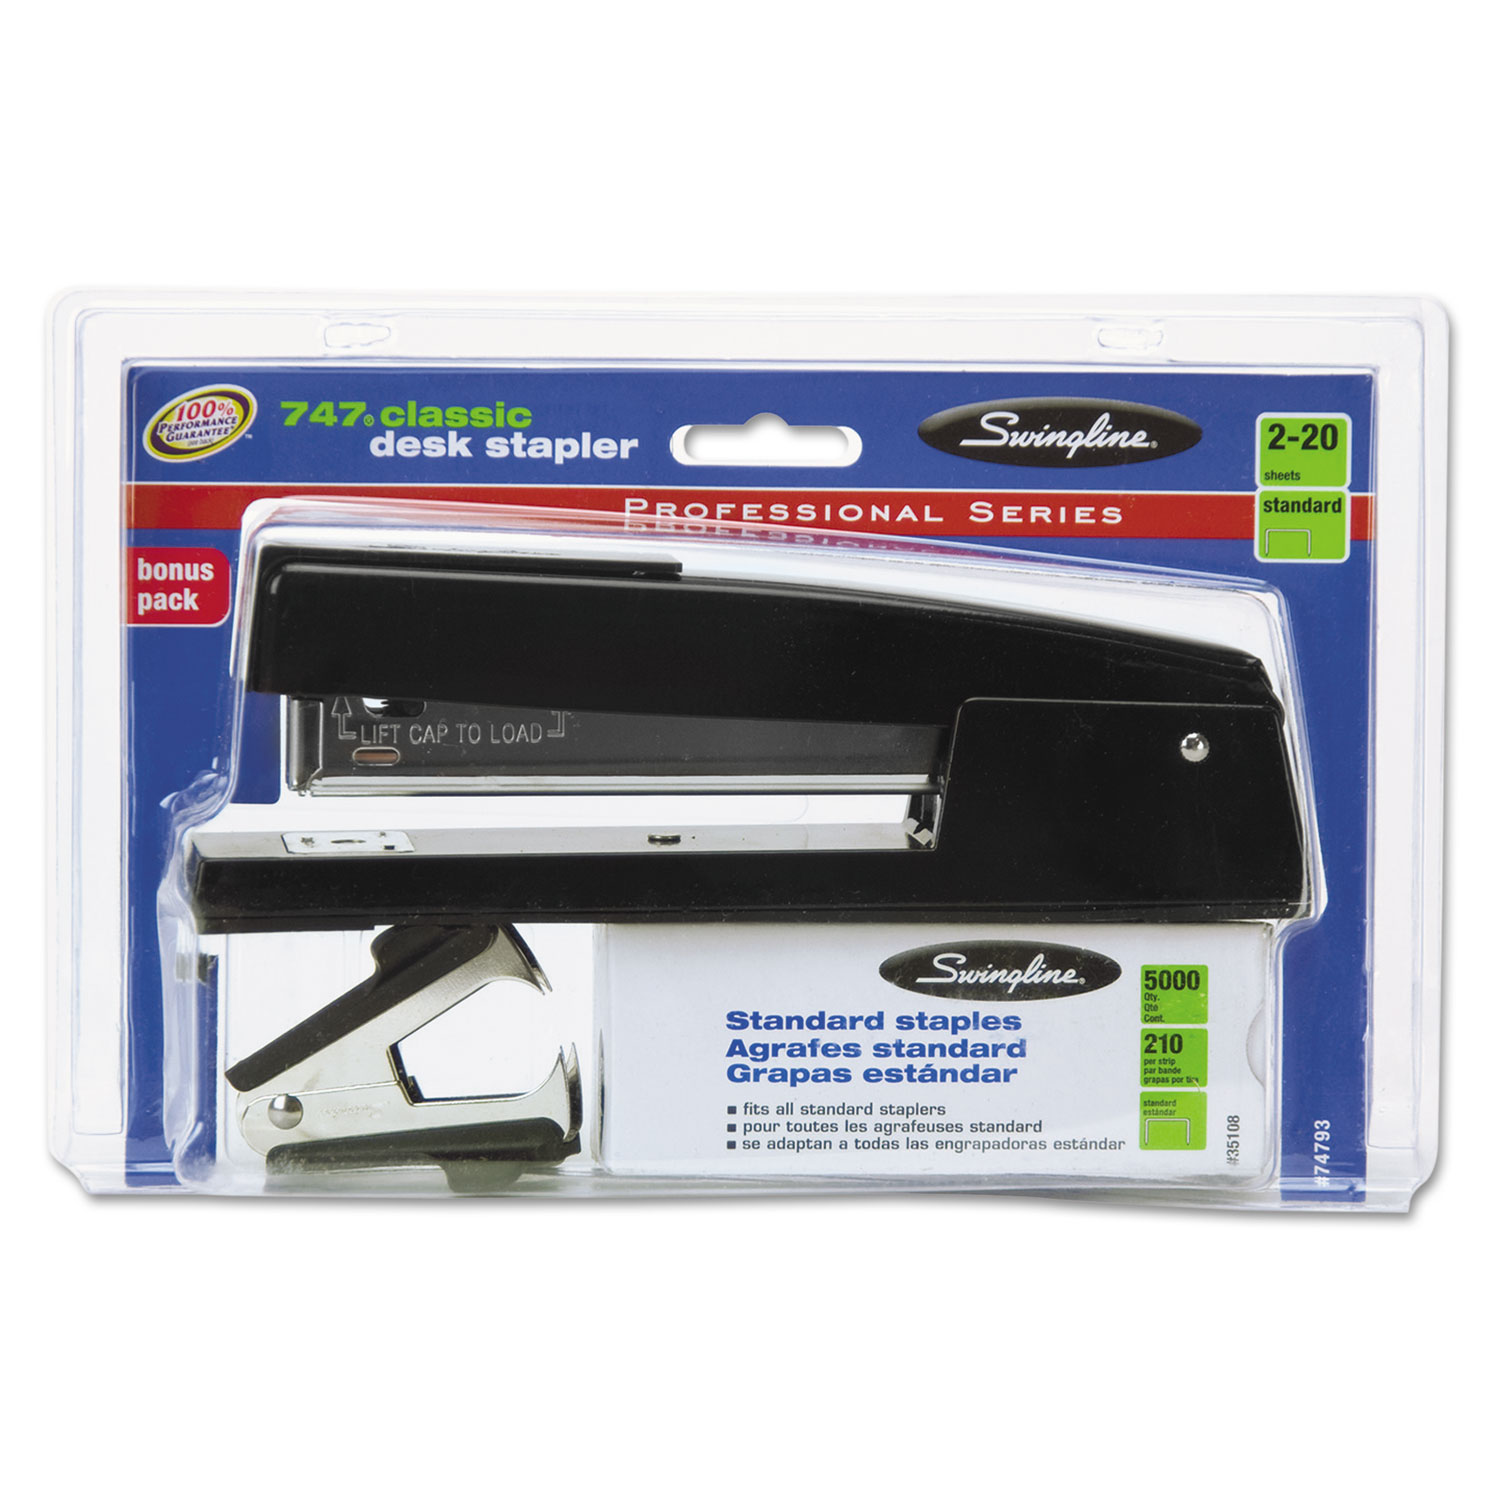 747 Classic Stapler Plus Pack with Staple Remover and Staples, 20-Sheet Capacity, Black